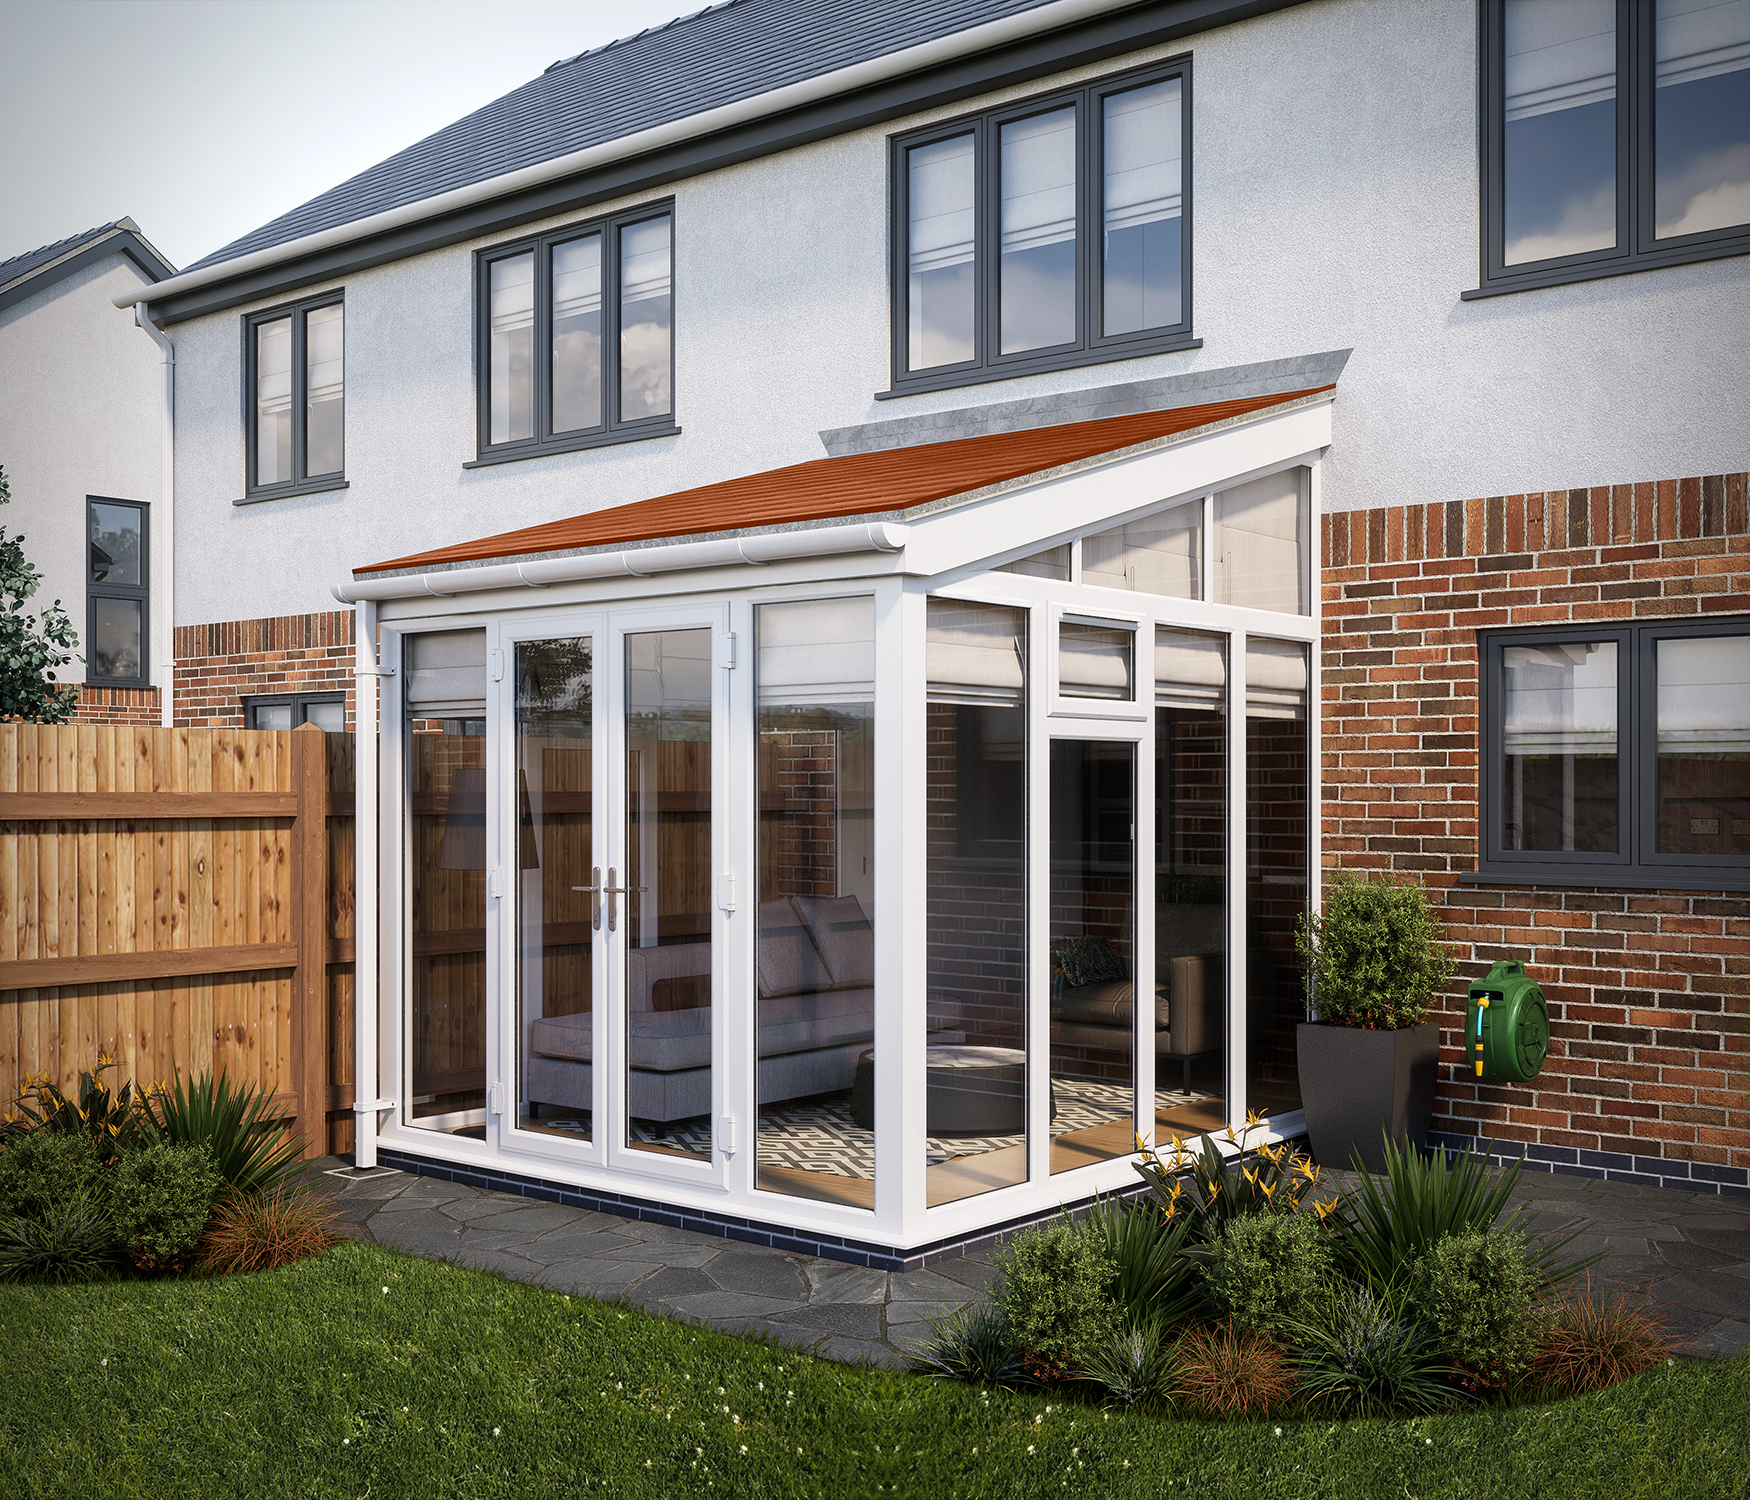 Image of SOLid Roof Full Height Lean to Conservatory White Frames with Rustic Terracotta Tiles - 10 x 10ft